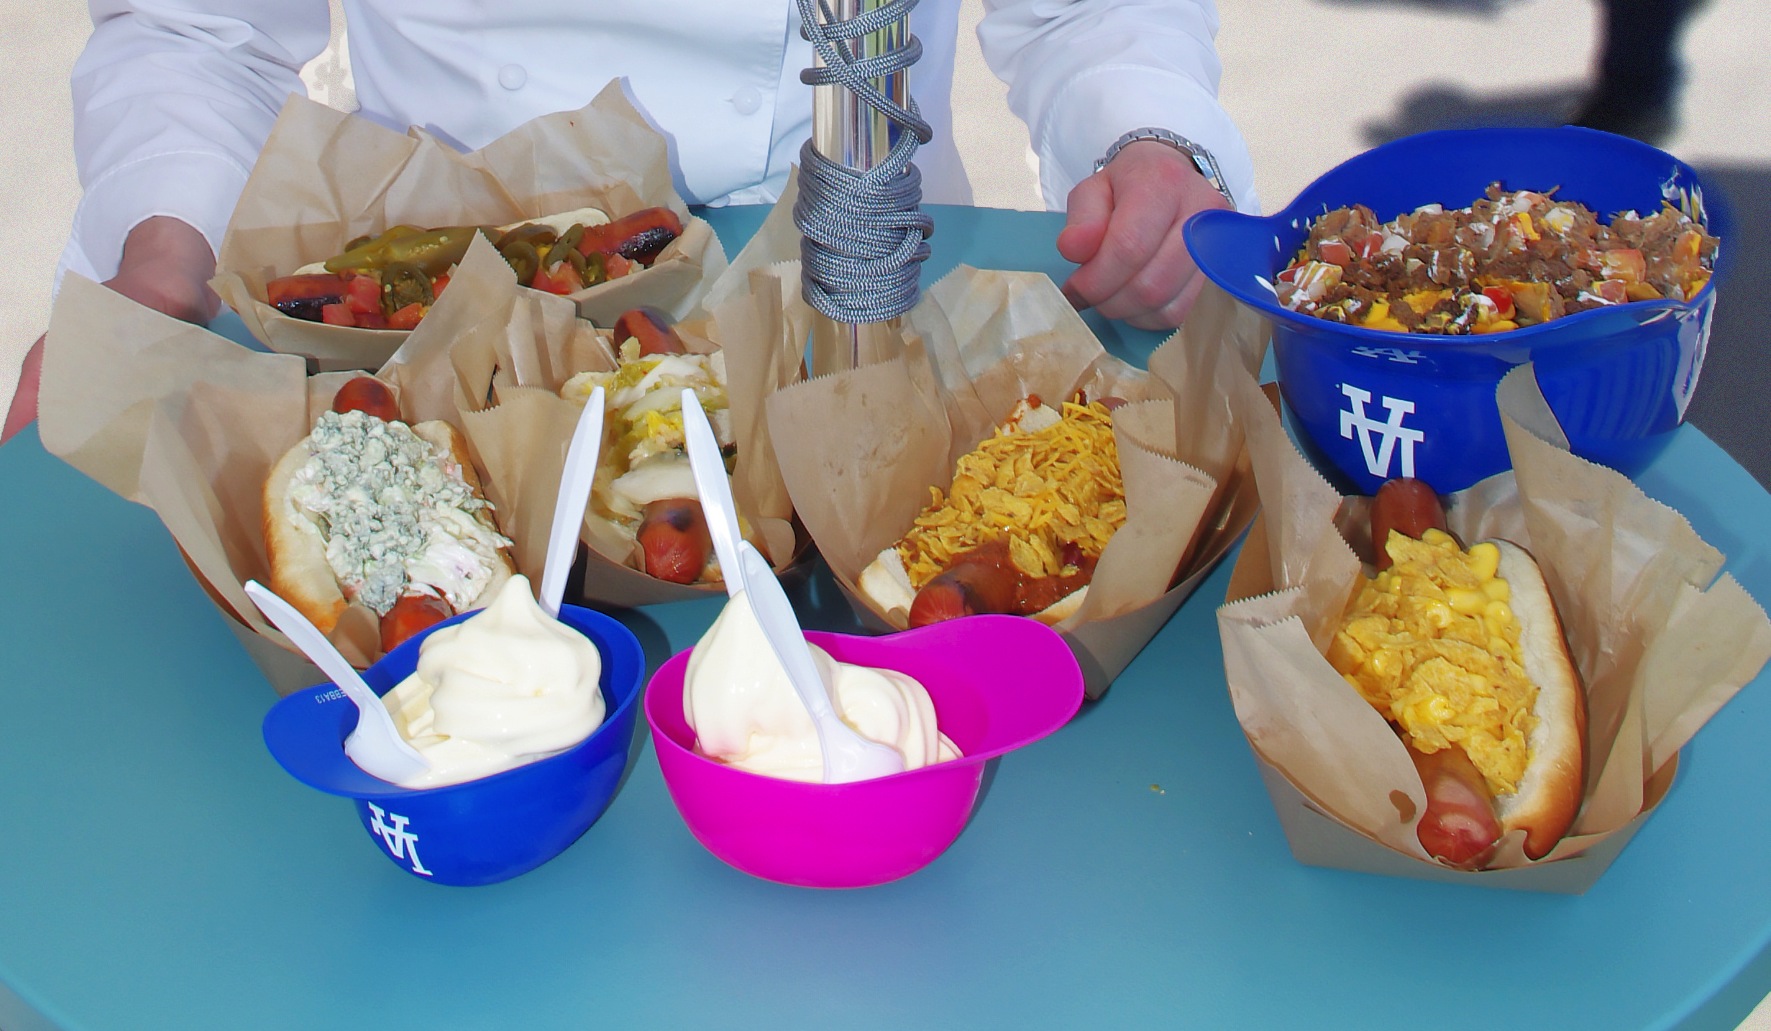 A look at some of the notable Dodger concession items. (Joe Mock)